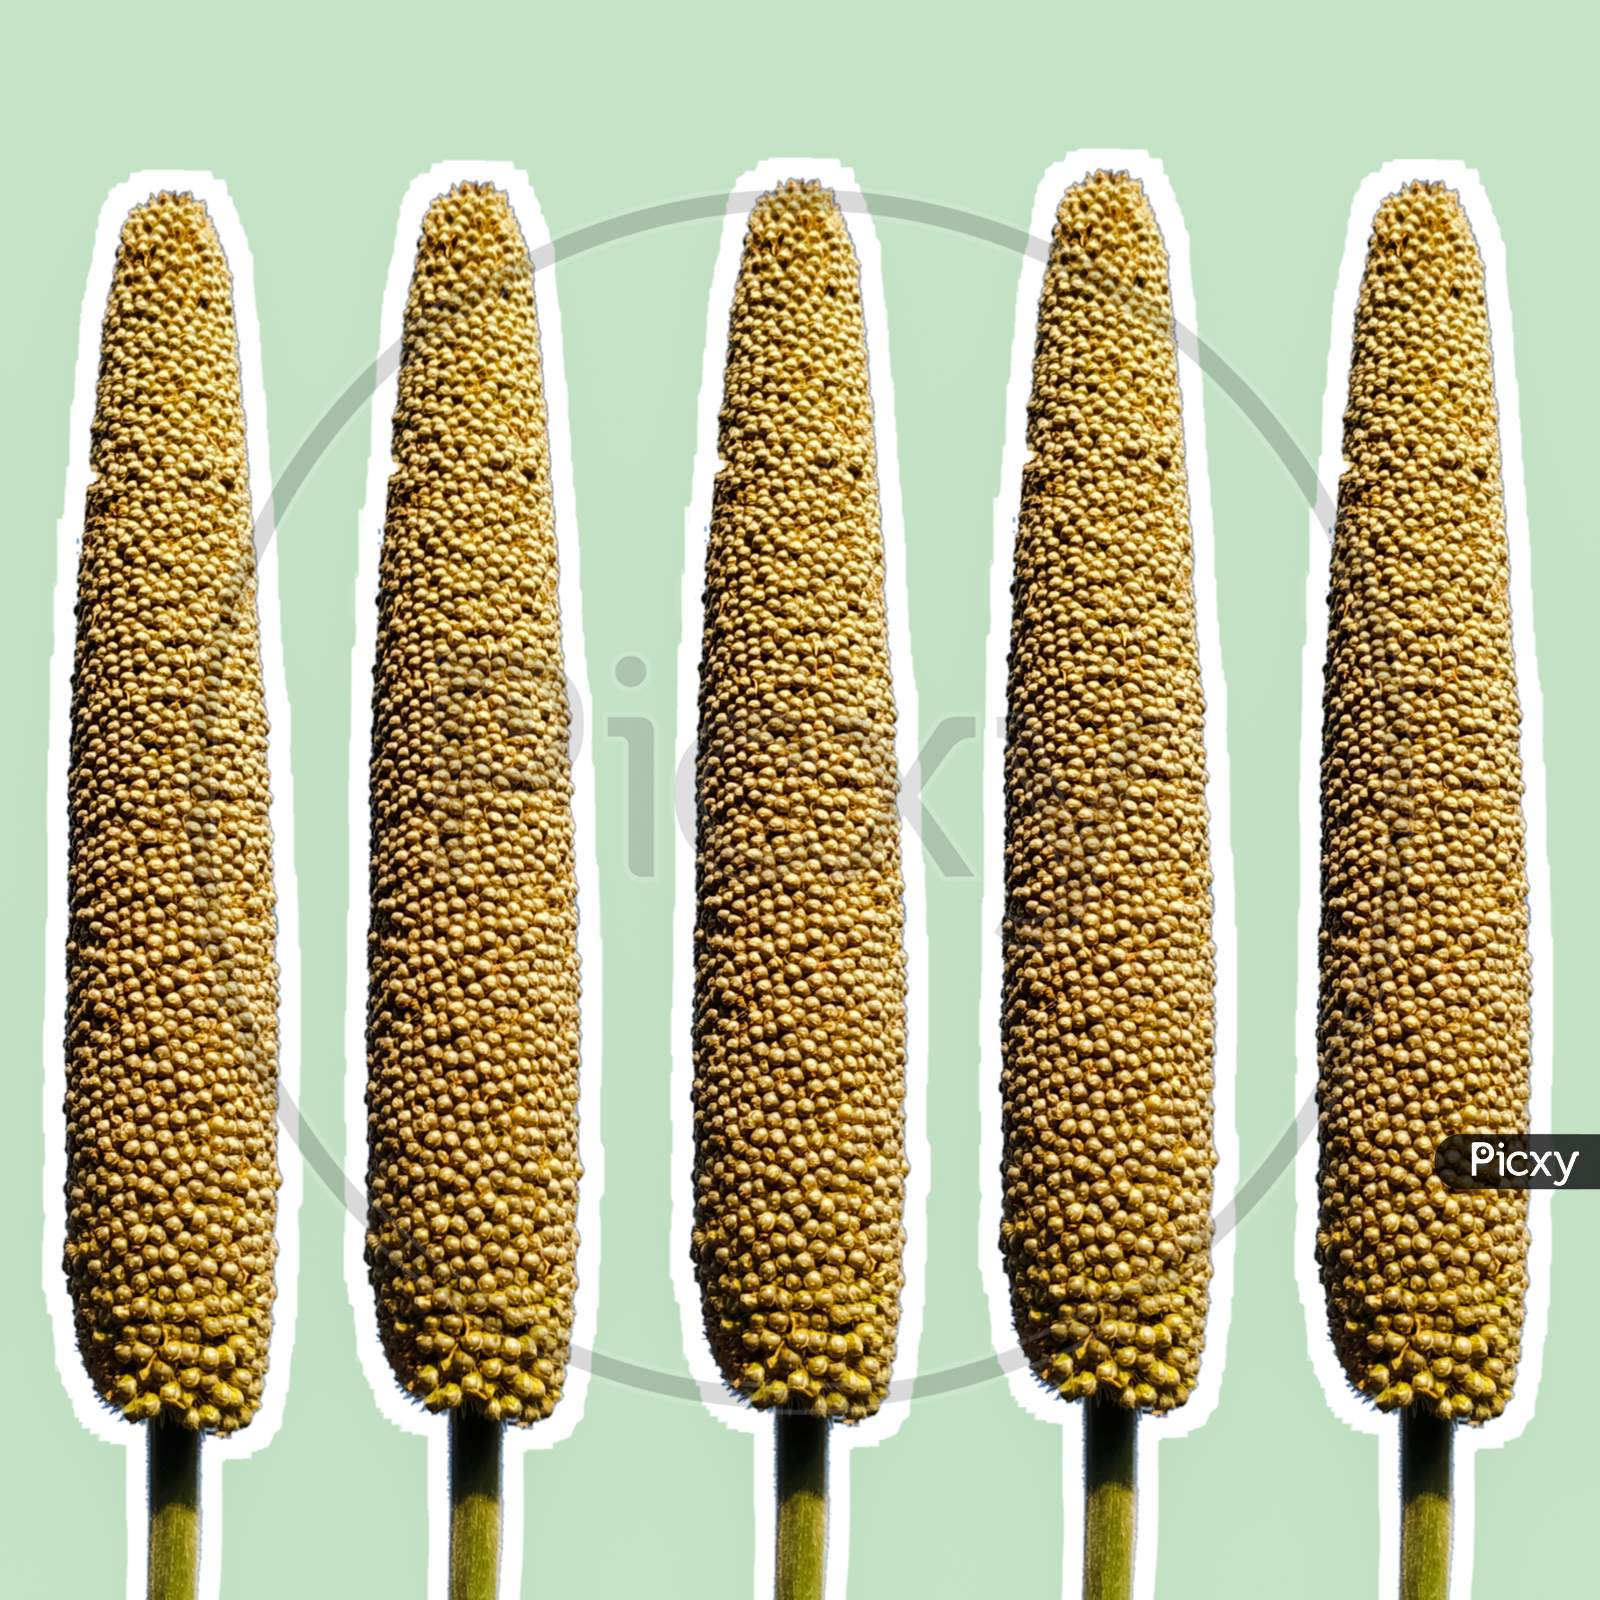 Millet Ears Isolated On Mint Background